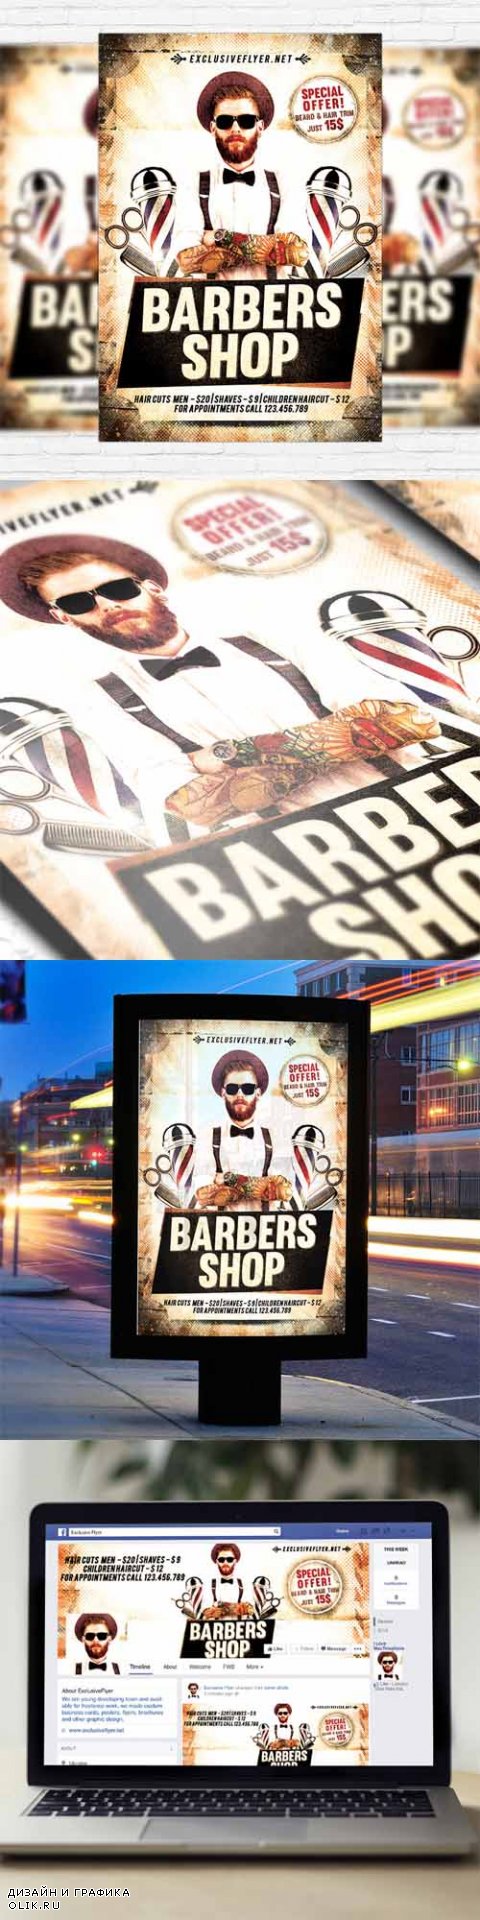 Flyer Template - Barbers Shop + Facebook Cover